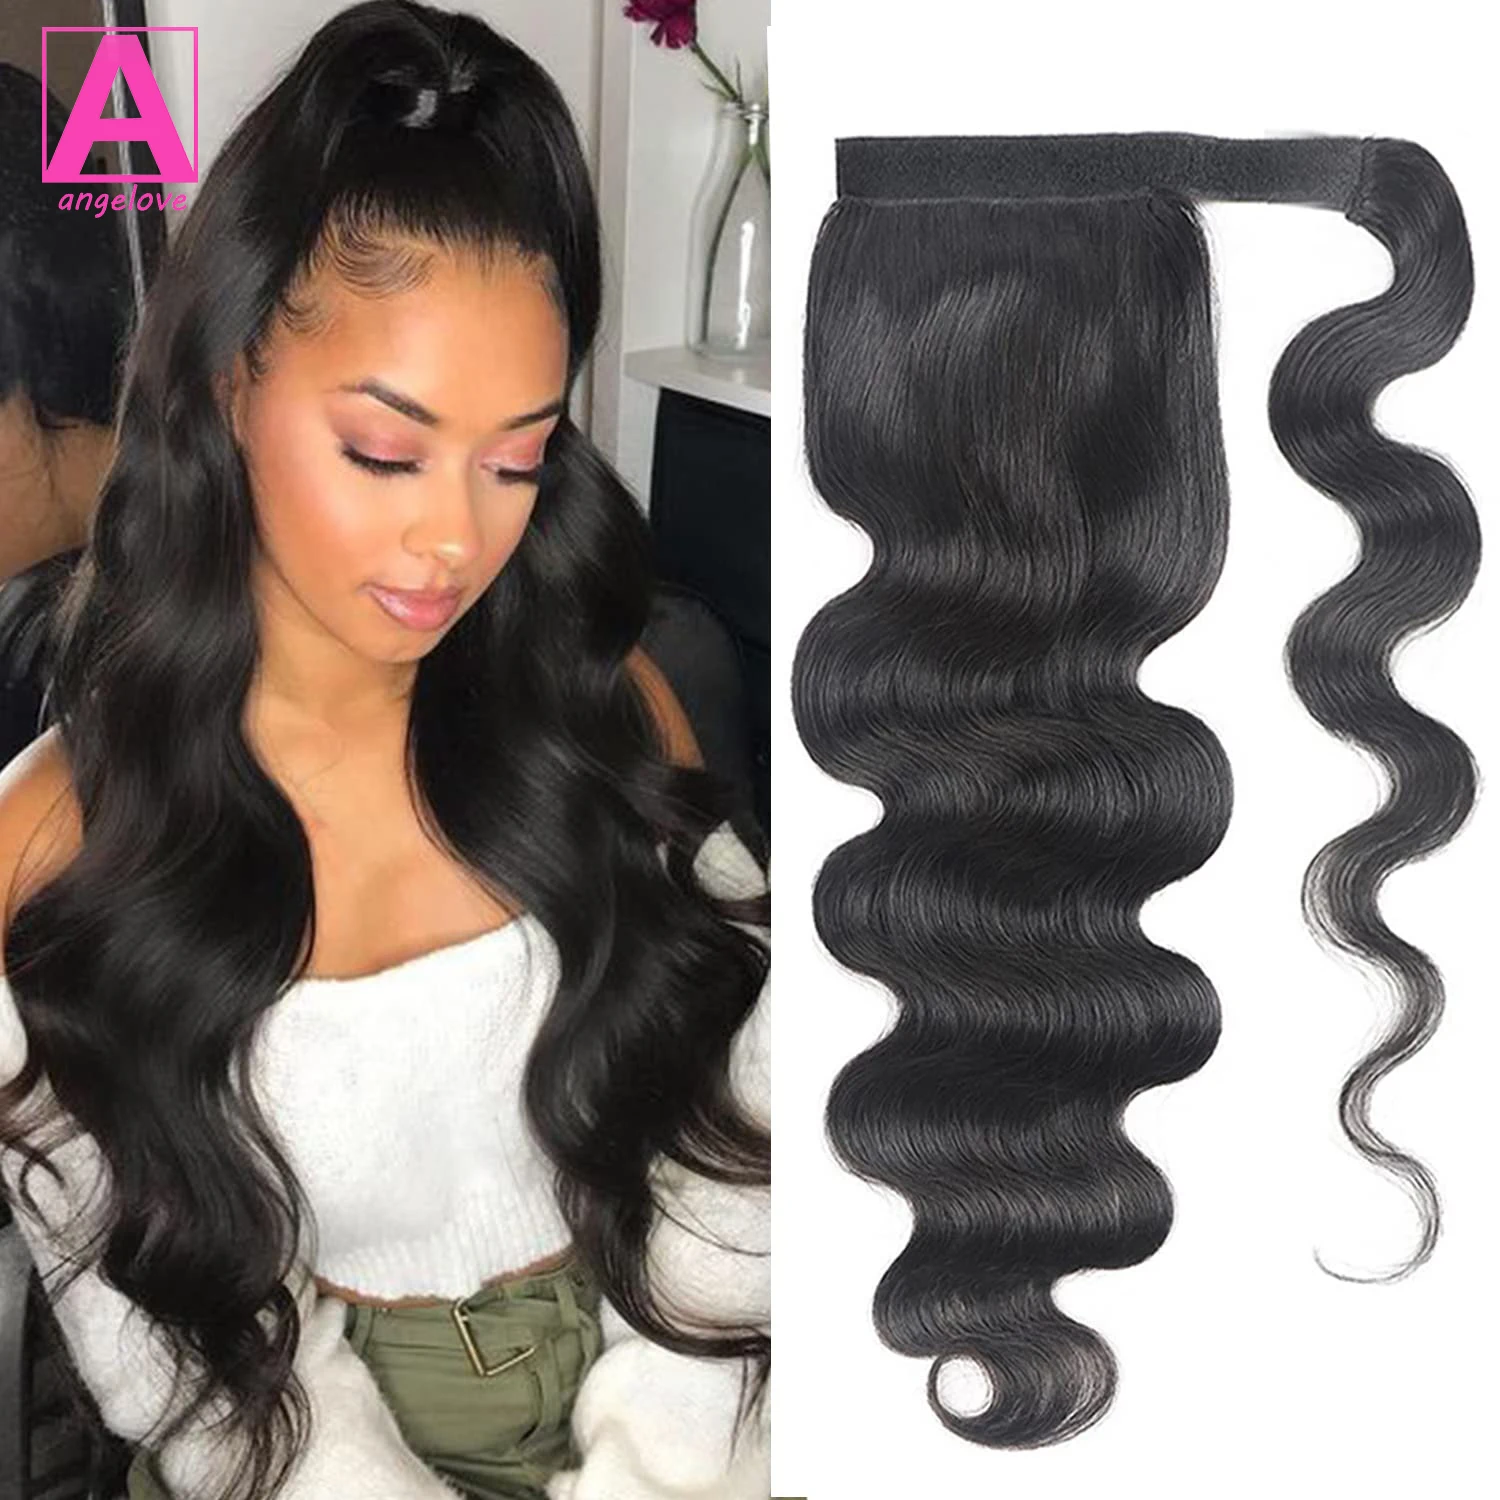 

Natural Black Body Wave Real Human Hair Ponytail Extension Wrap Around Long Clip in Wavy Pony Tail Hair Extensions for Women